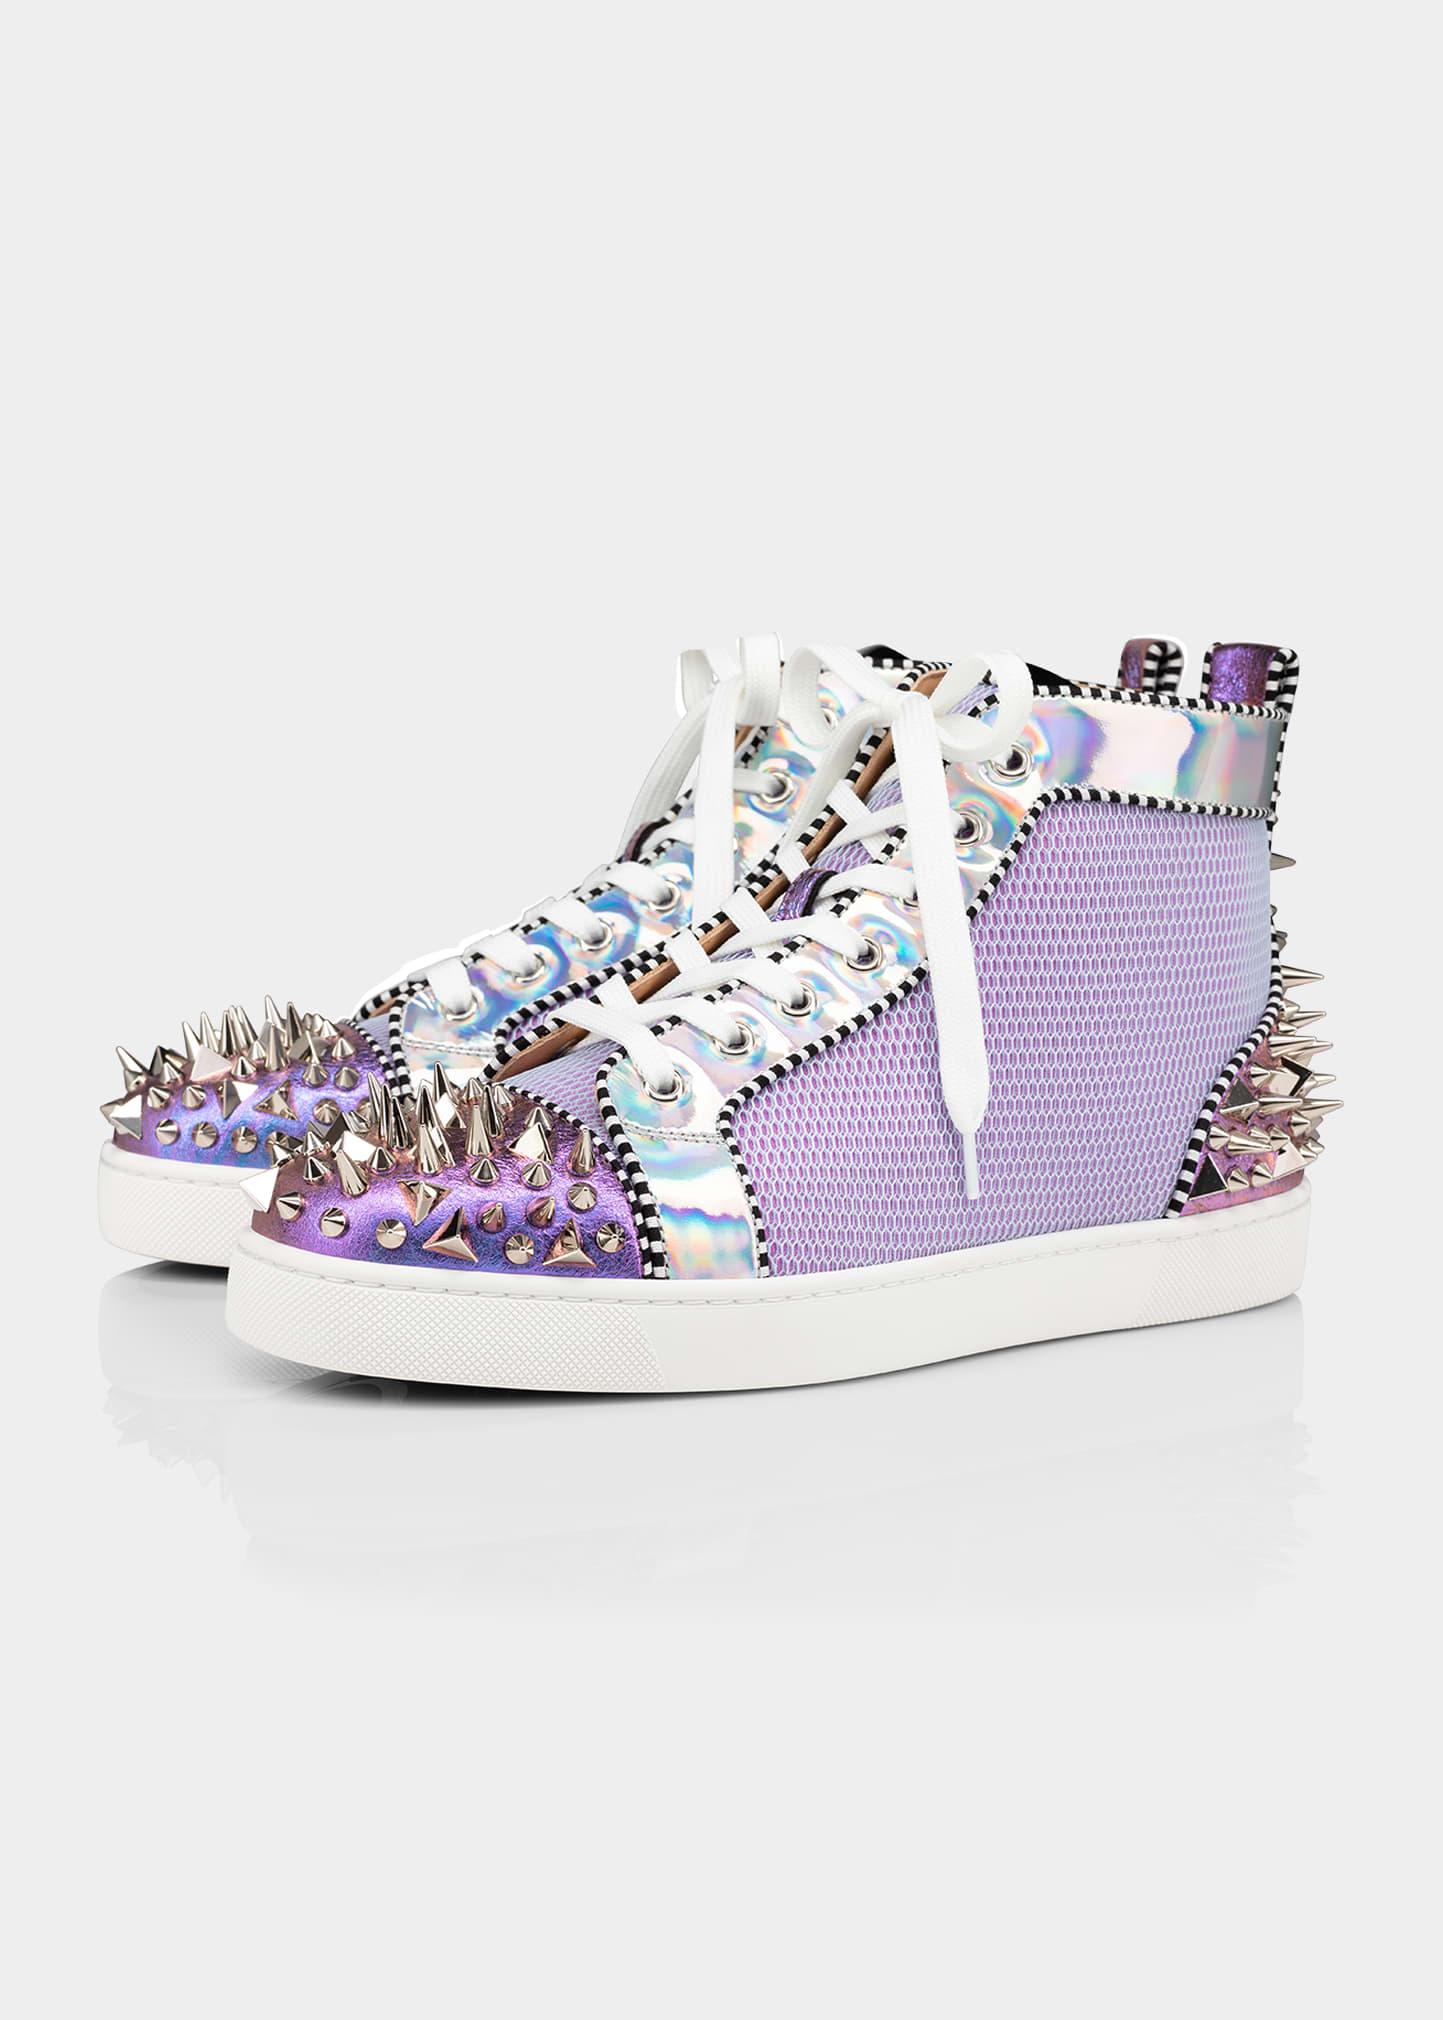 Christian Louboutin Lou Pik Pik 2 Orlato Mesh & Leather Spiked High-top  Sneakers in Purple for Men | Lyst